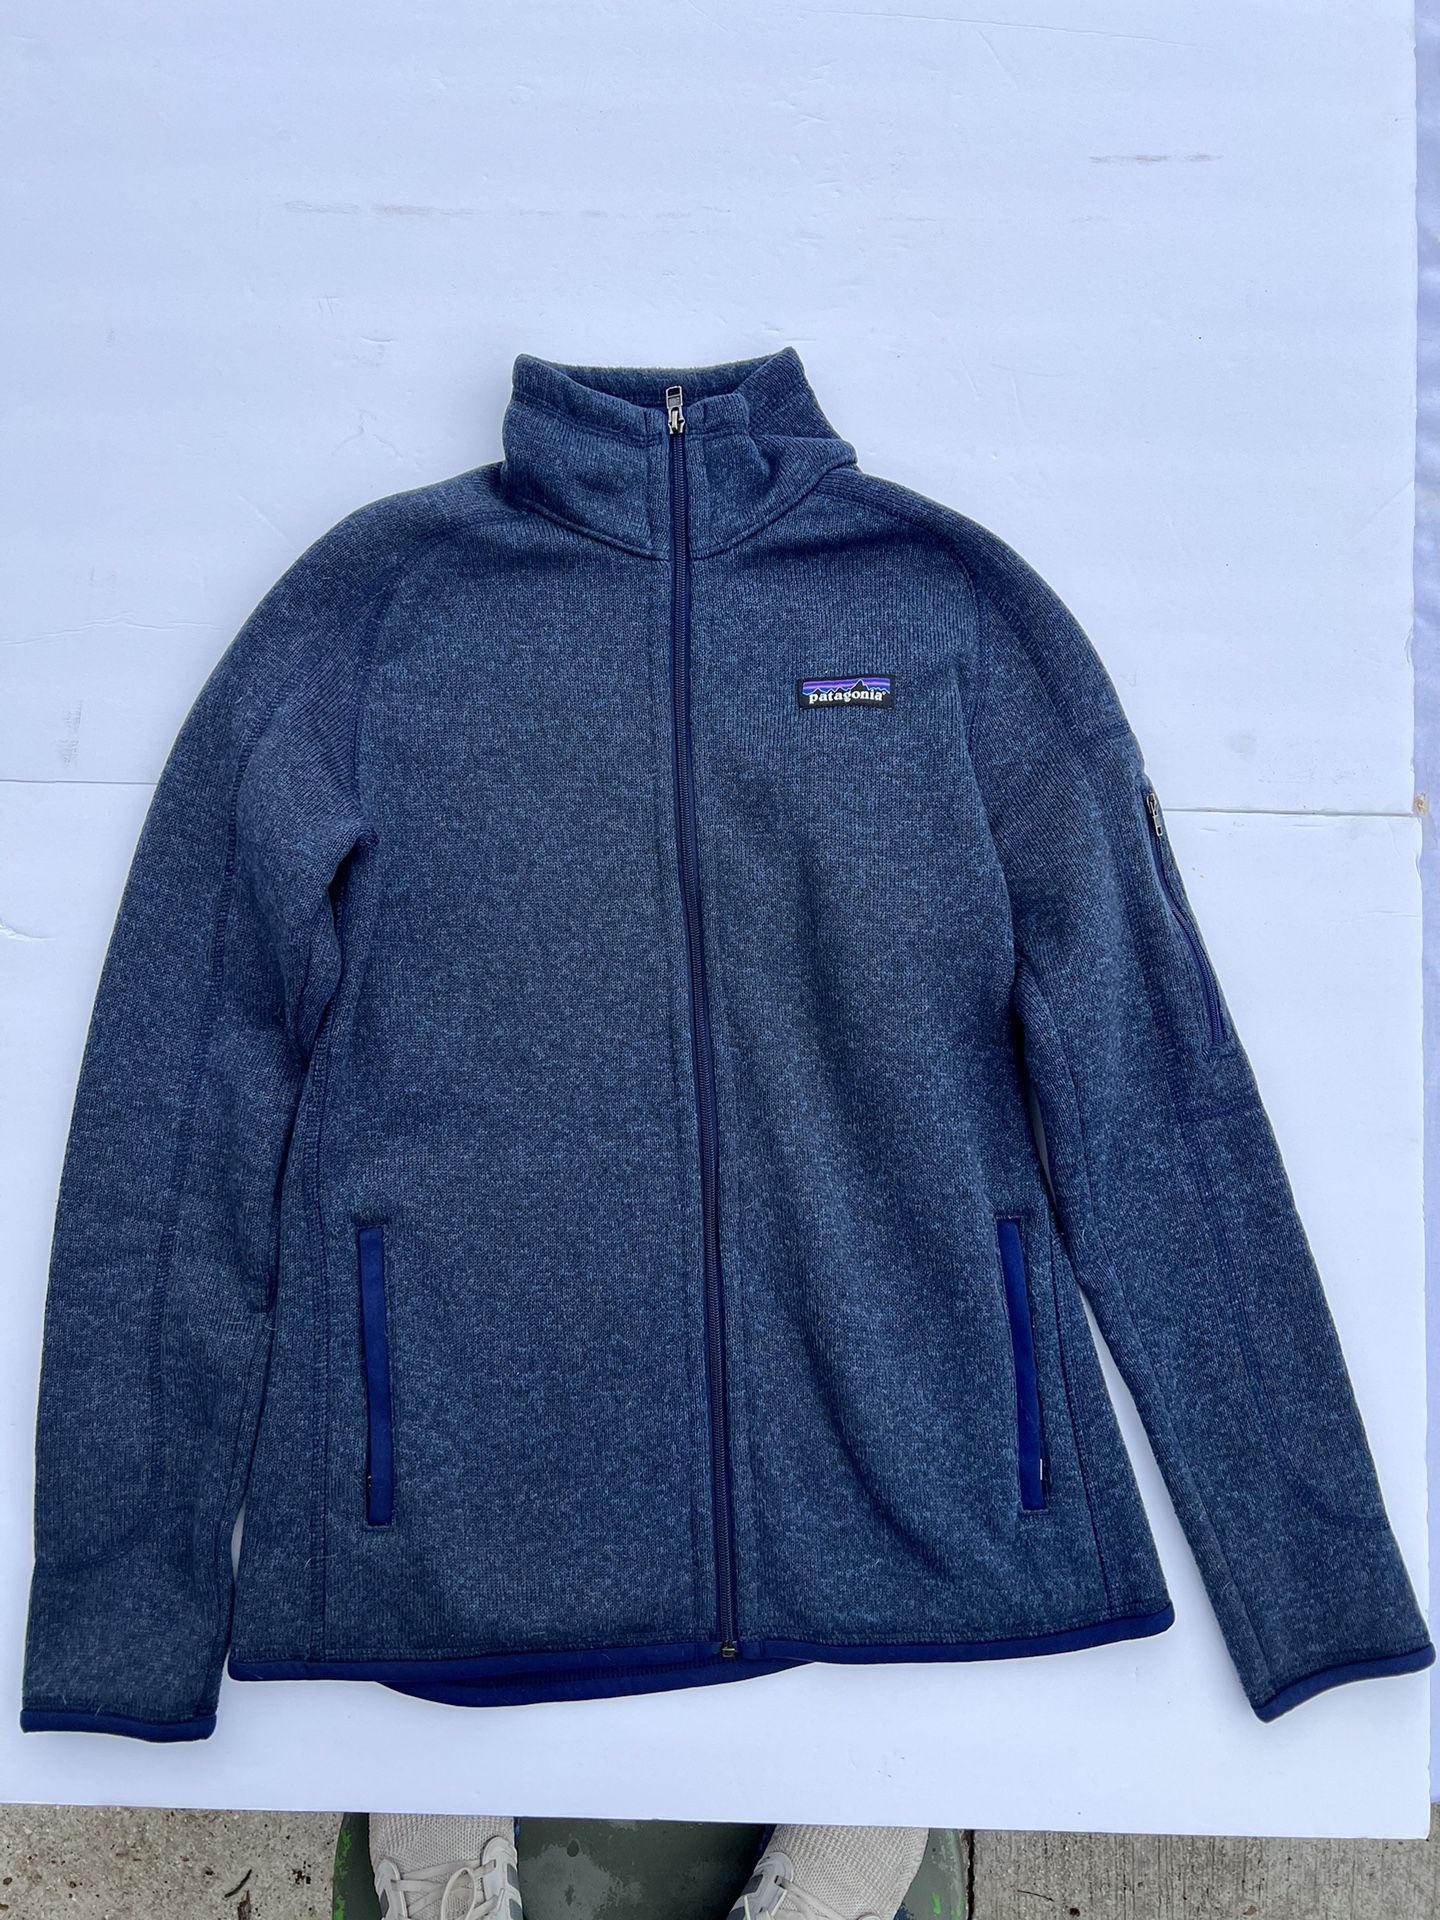 Patagonia Women’s Small Better Sweater